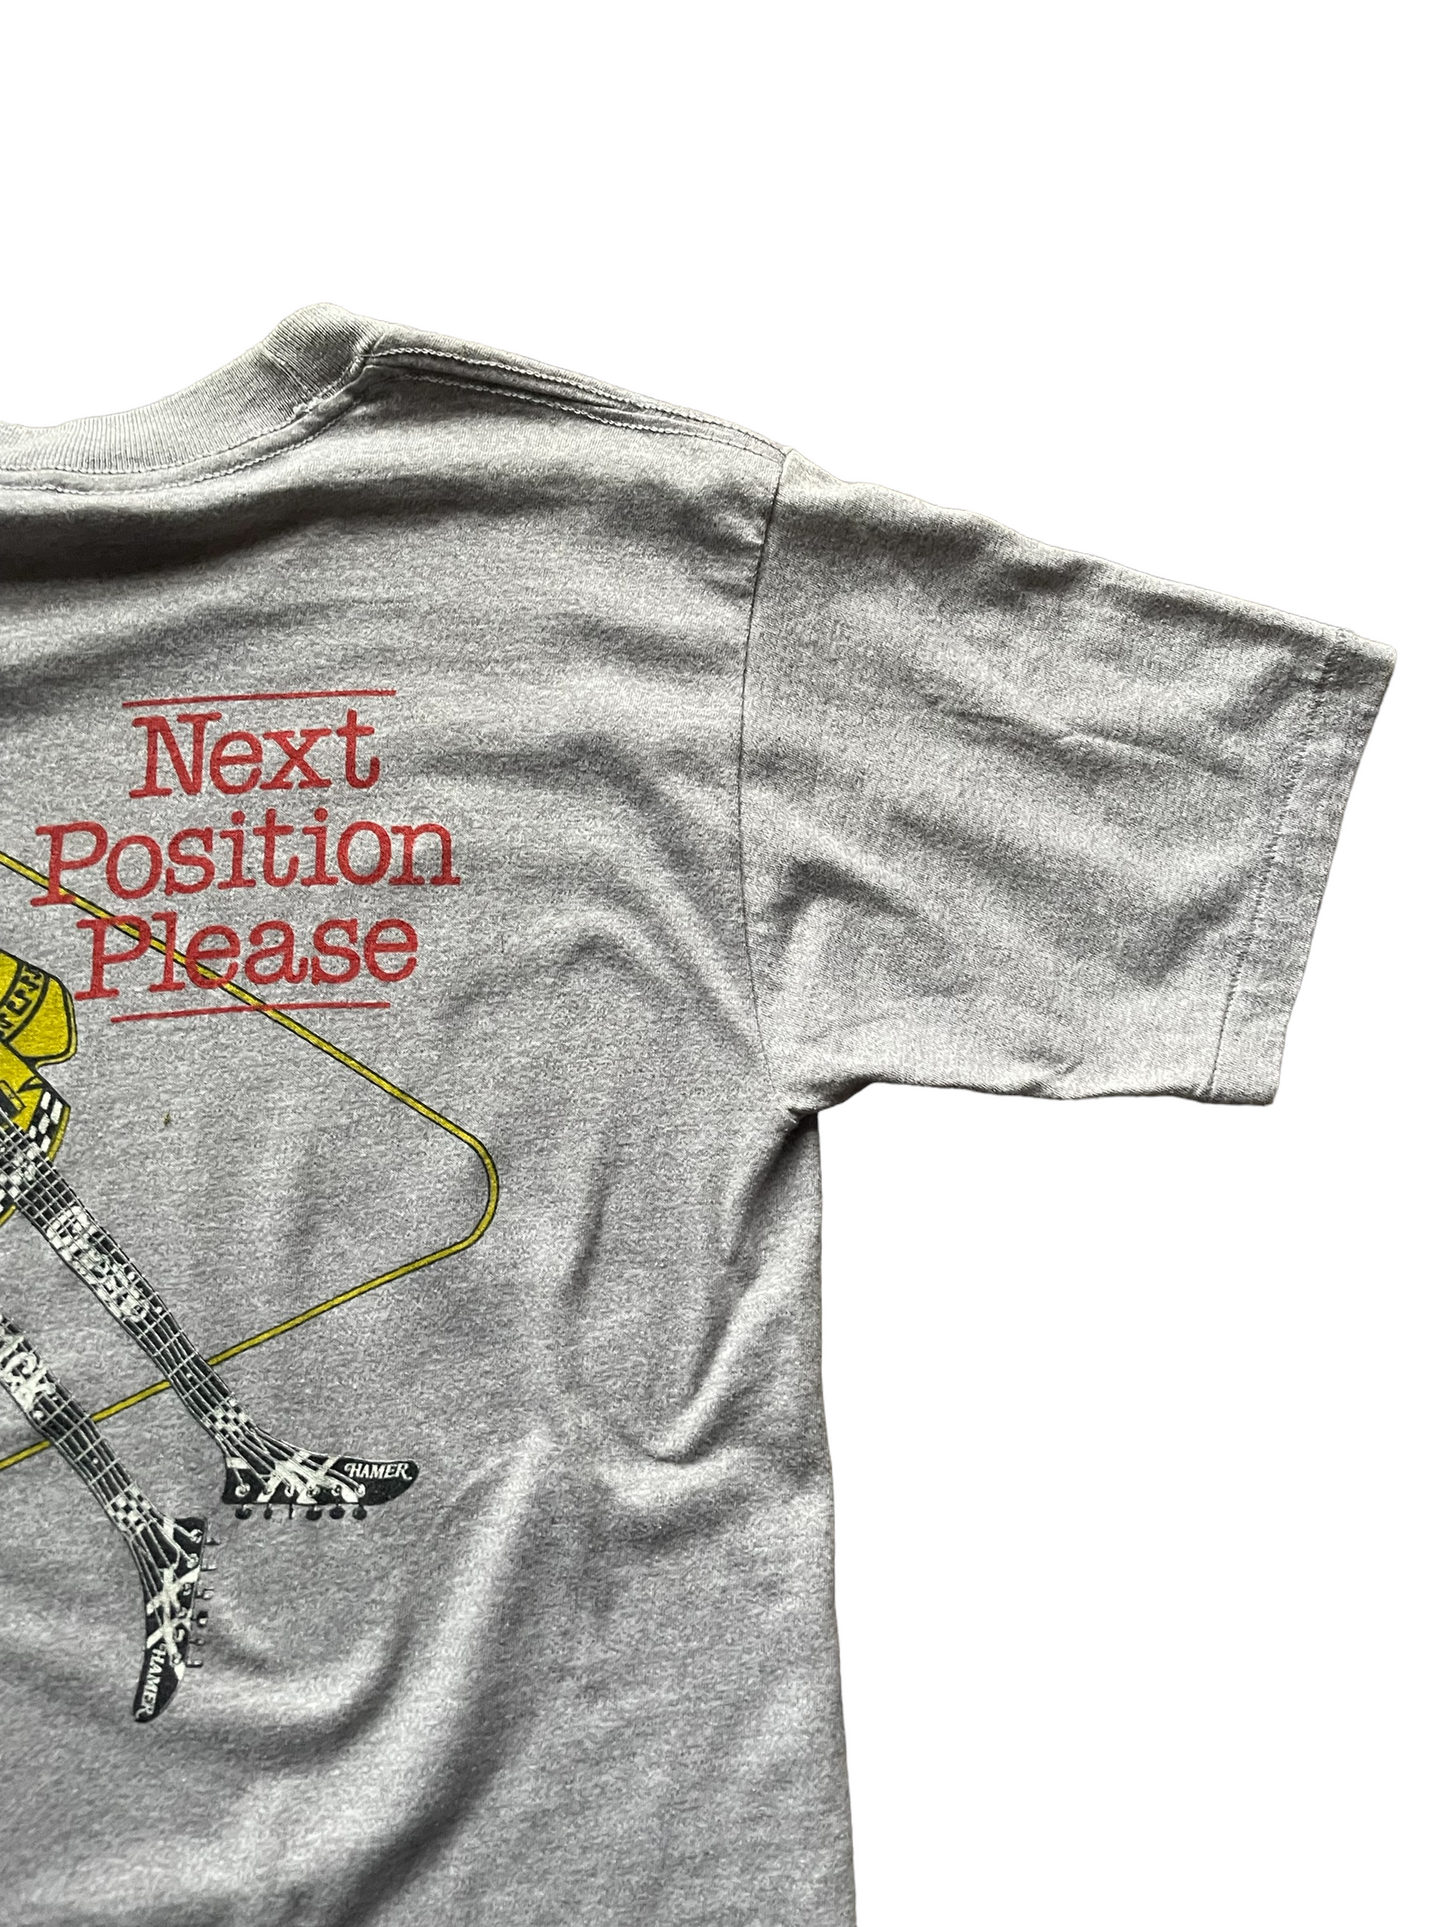 Right Sleeve VIew on Vintage Single Stitch Cheap Trick Band Tour Tee "Next Position Please" SZ L | Vintage Rock Tees | Barn Owl Seattle